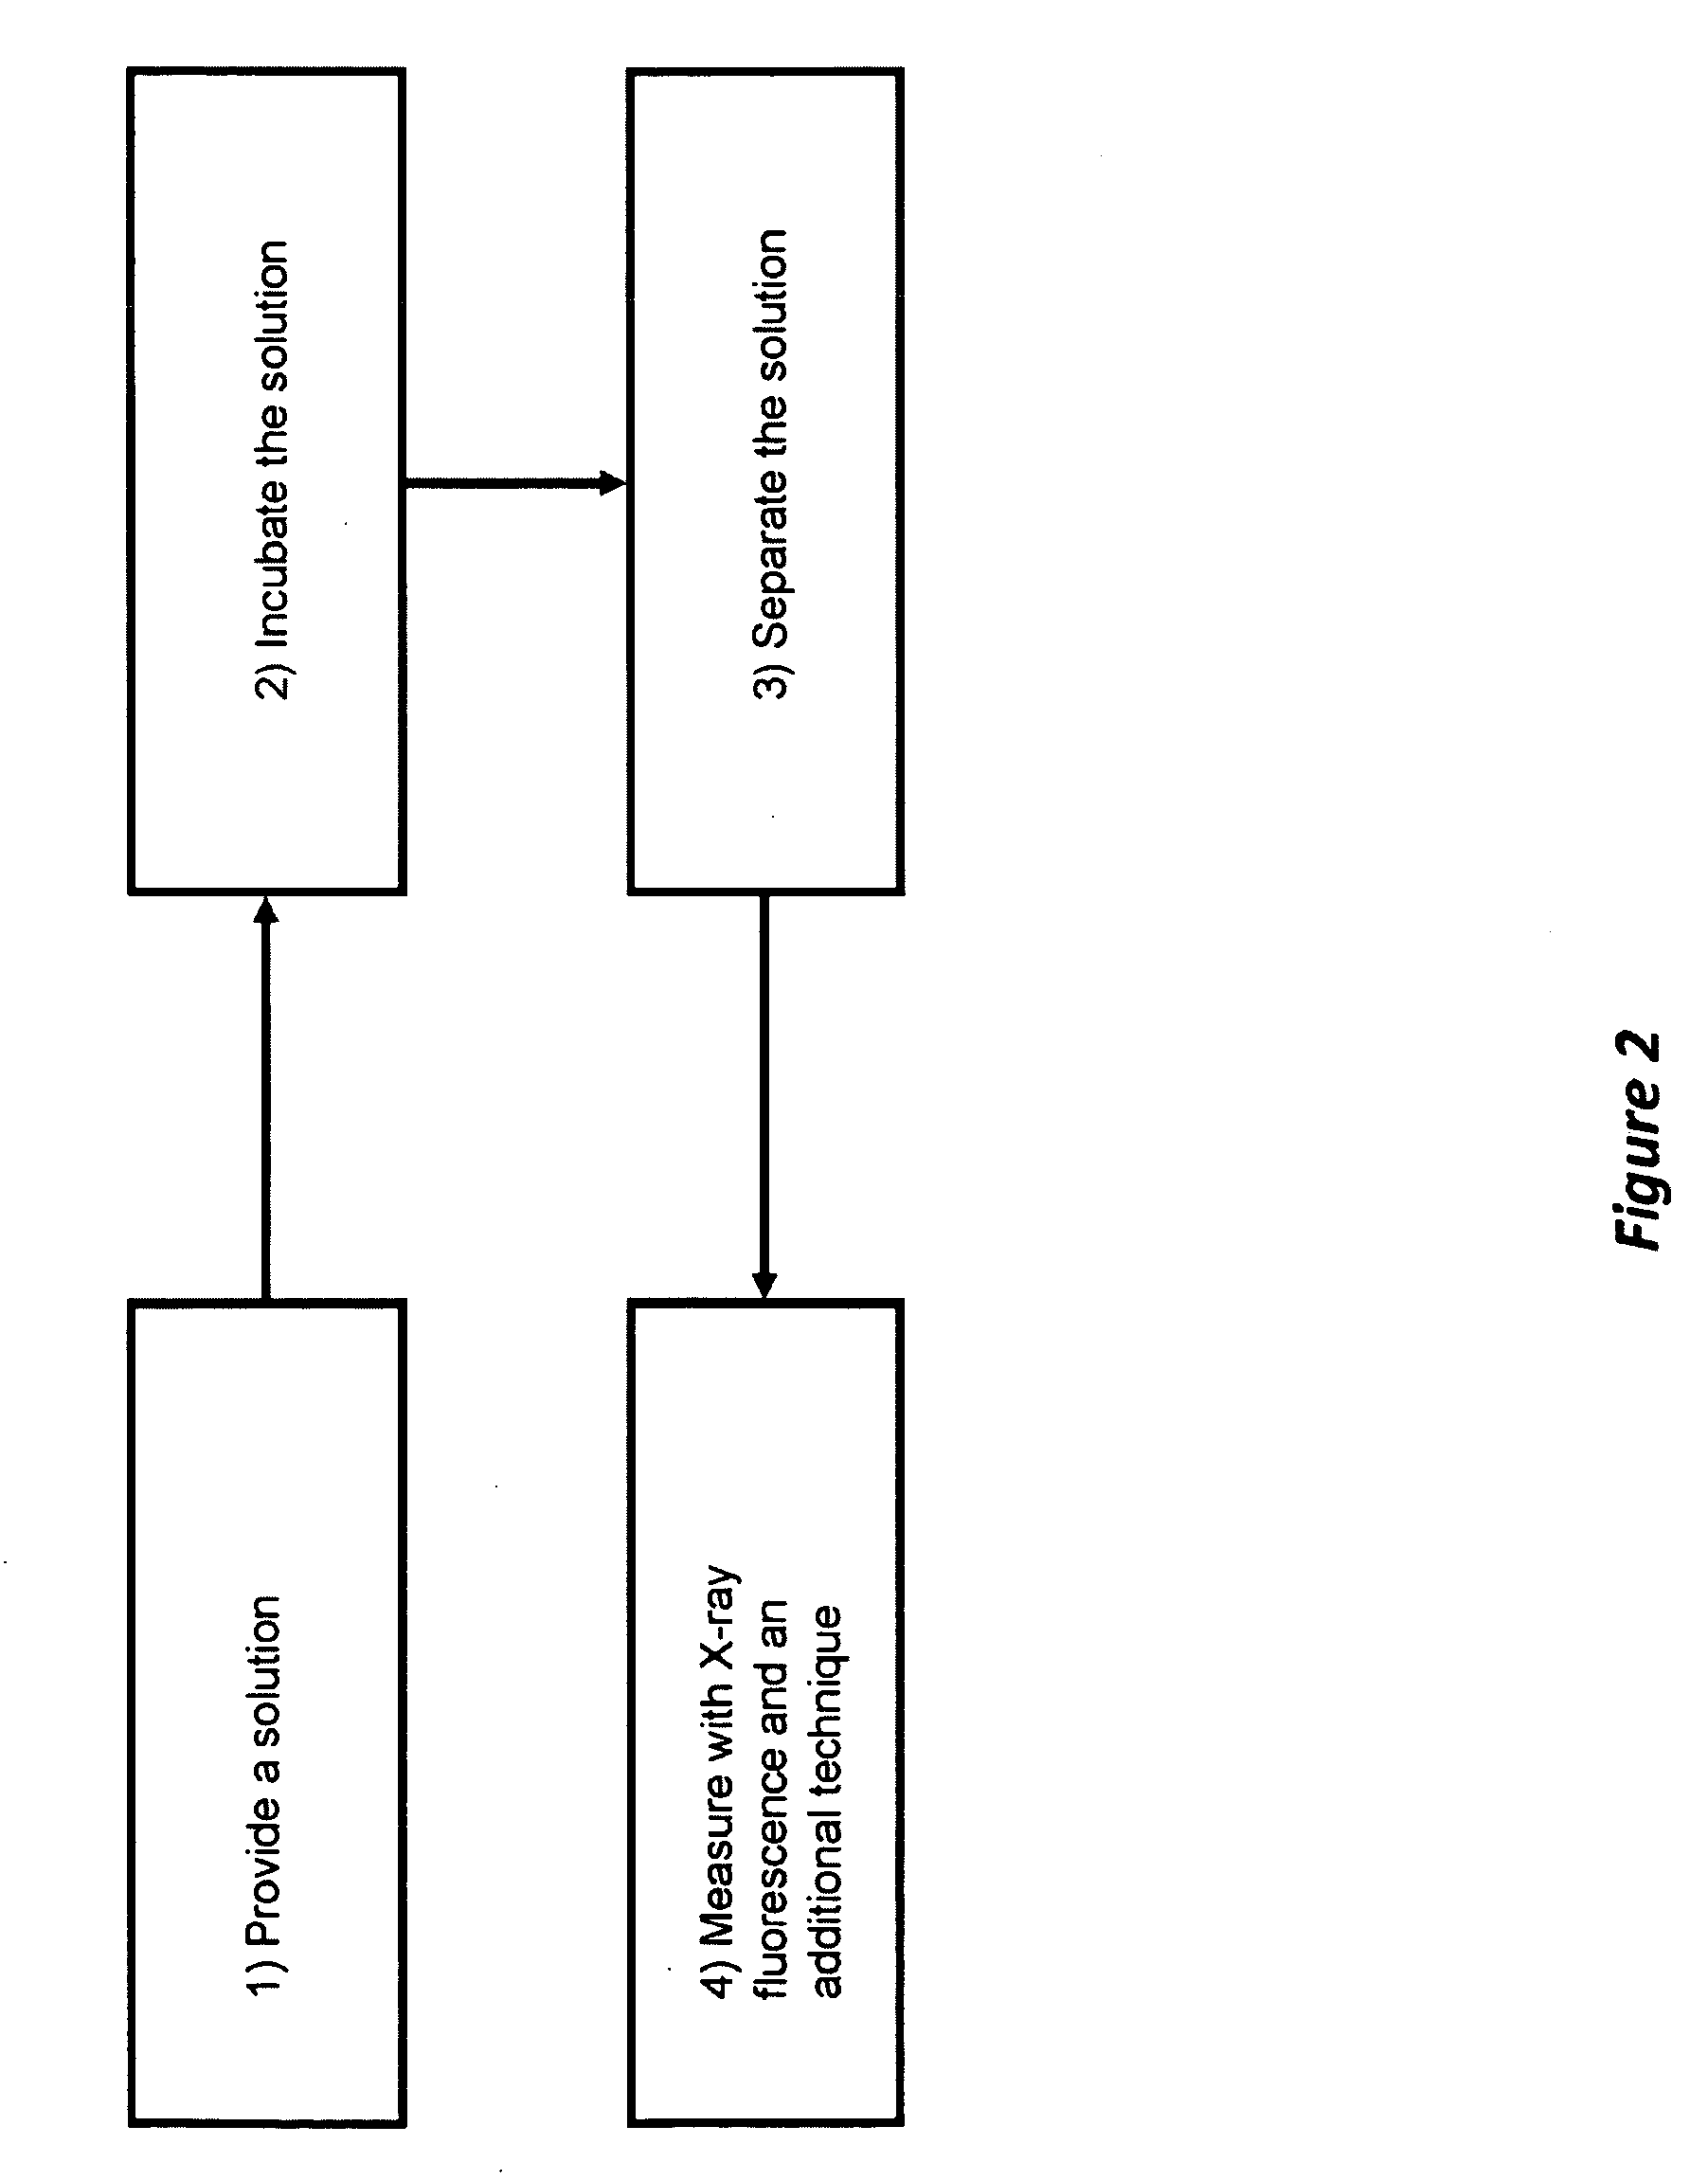 Method and Apparatus for Measuring Protein Post-Translational Modification